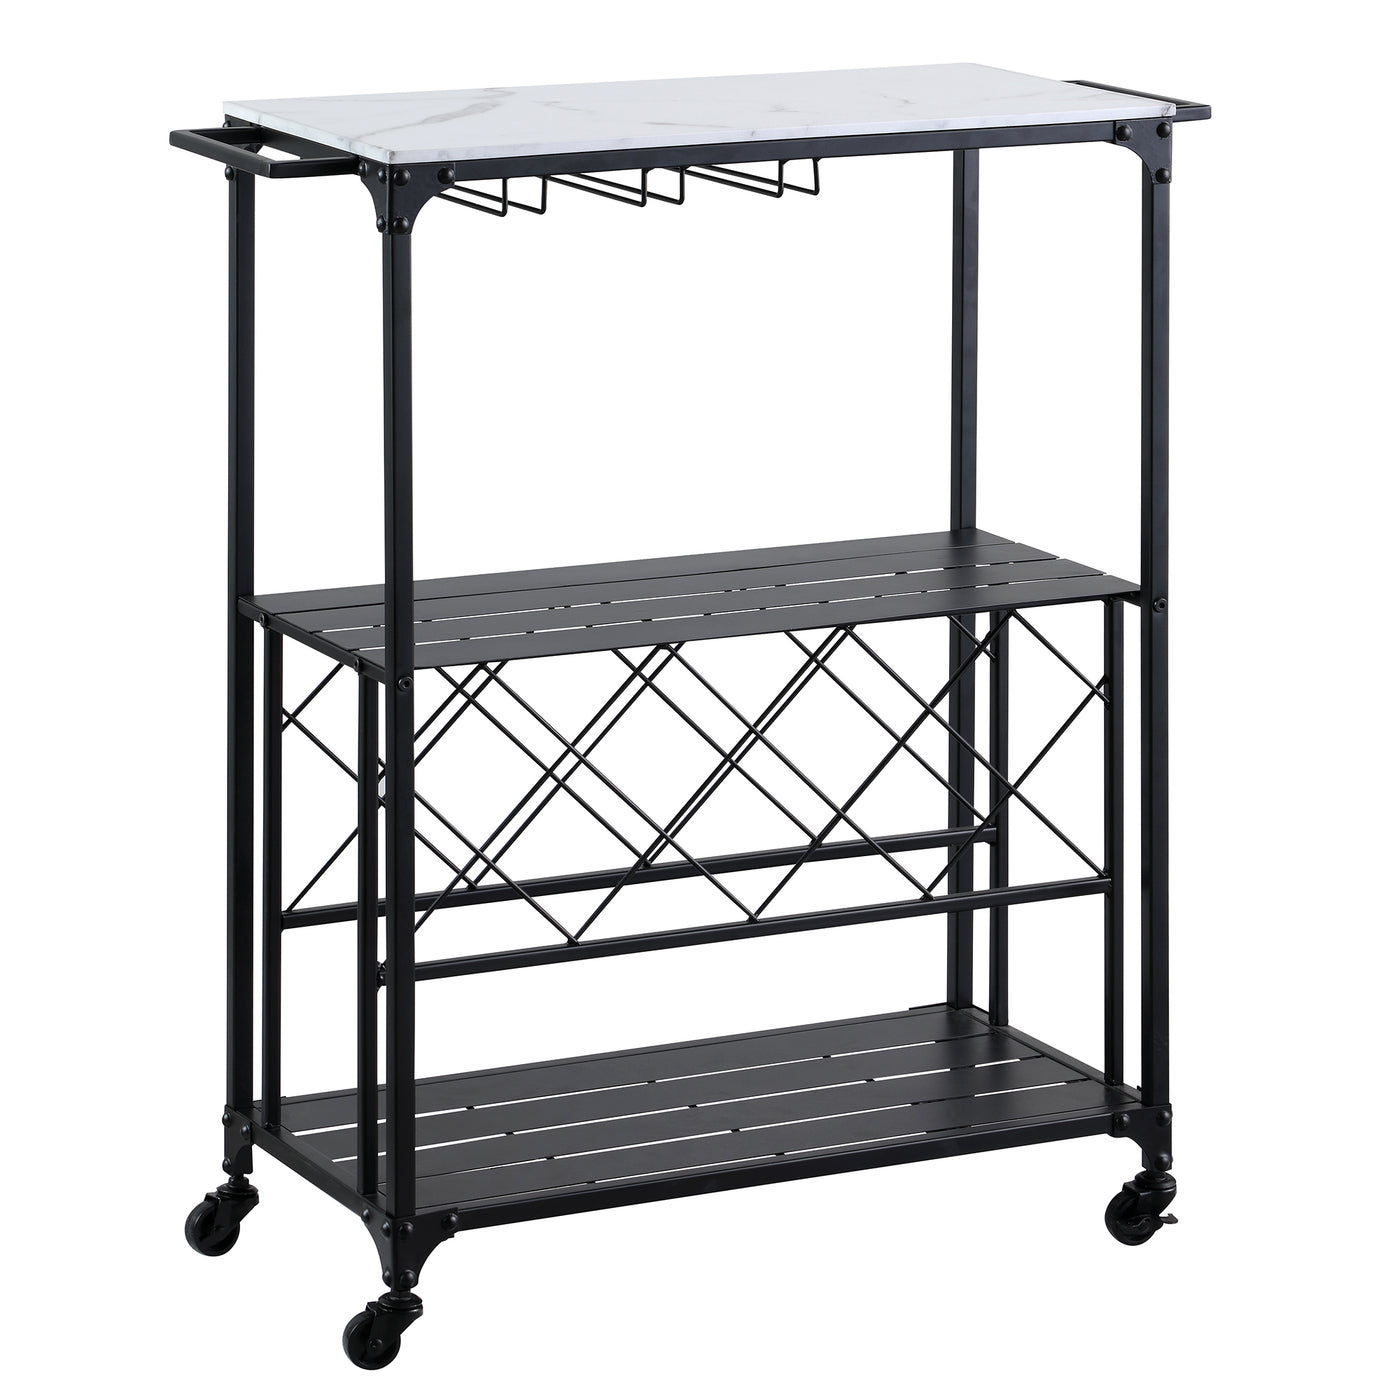 FirsTime & Co. Black And White Reisling Marbleized Bar Cart, Industrial Style, Made of Metal